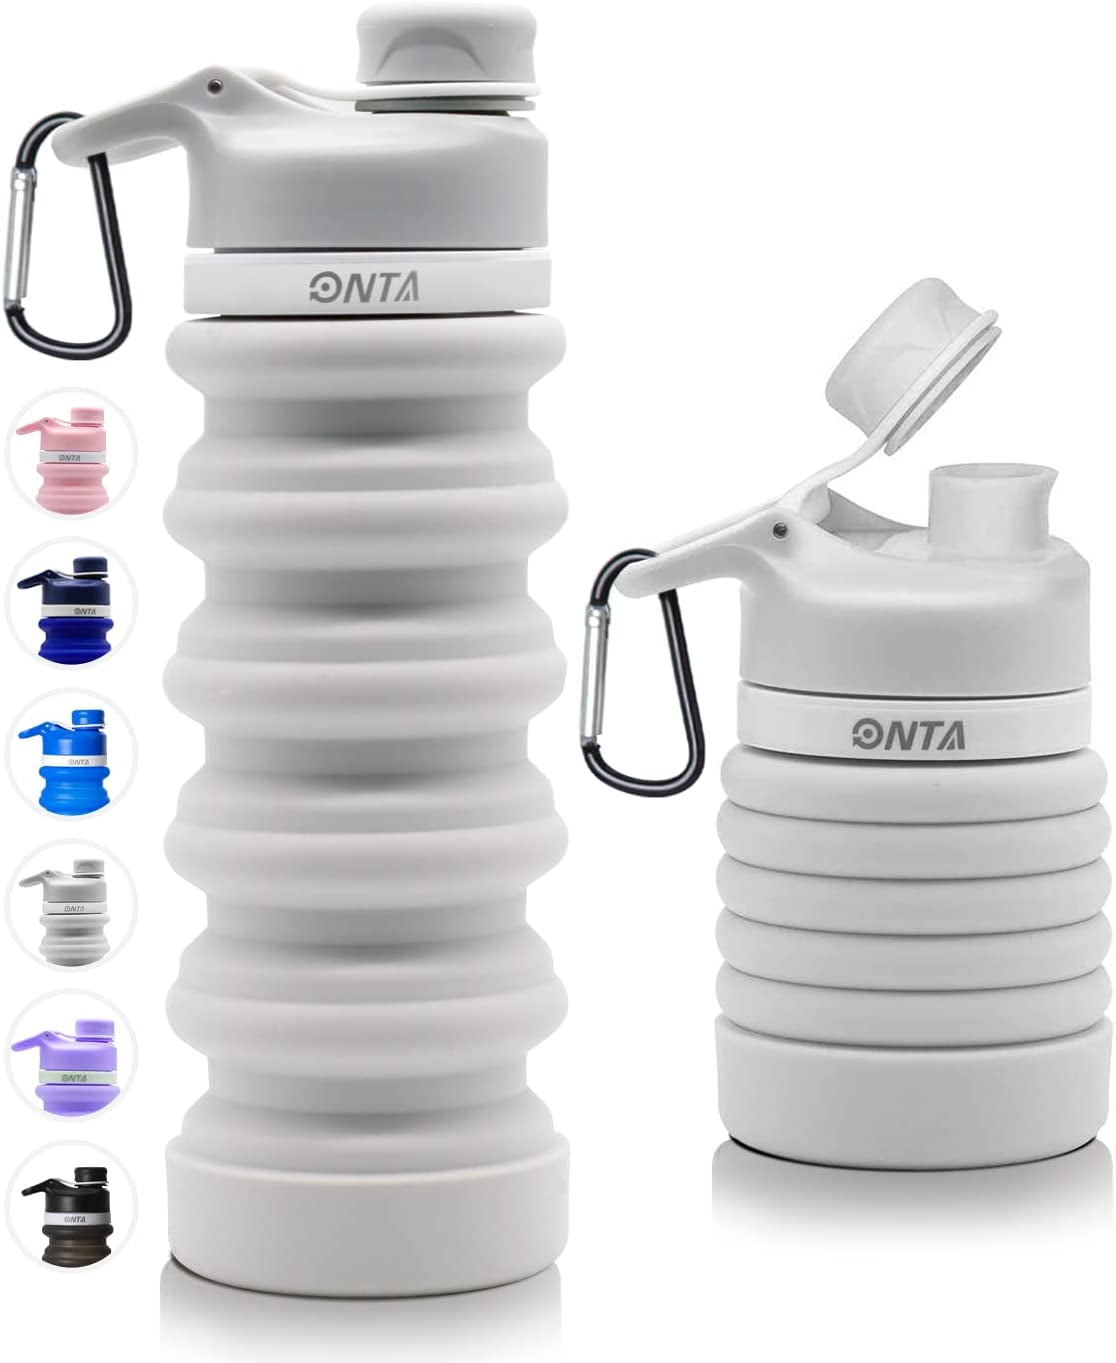 Heat-Resistant Leakproof Silicone Collapsible Water Bottle